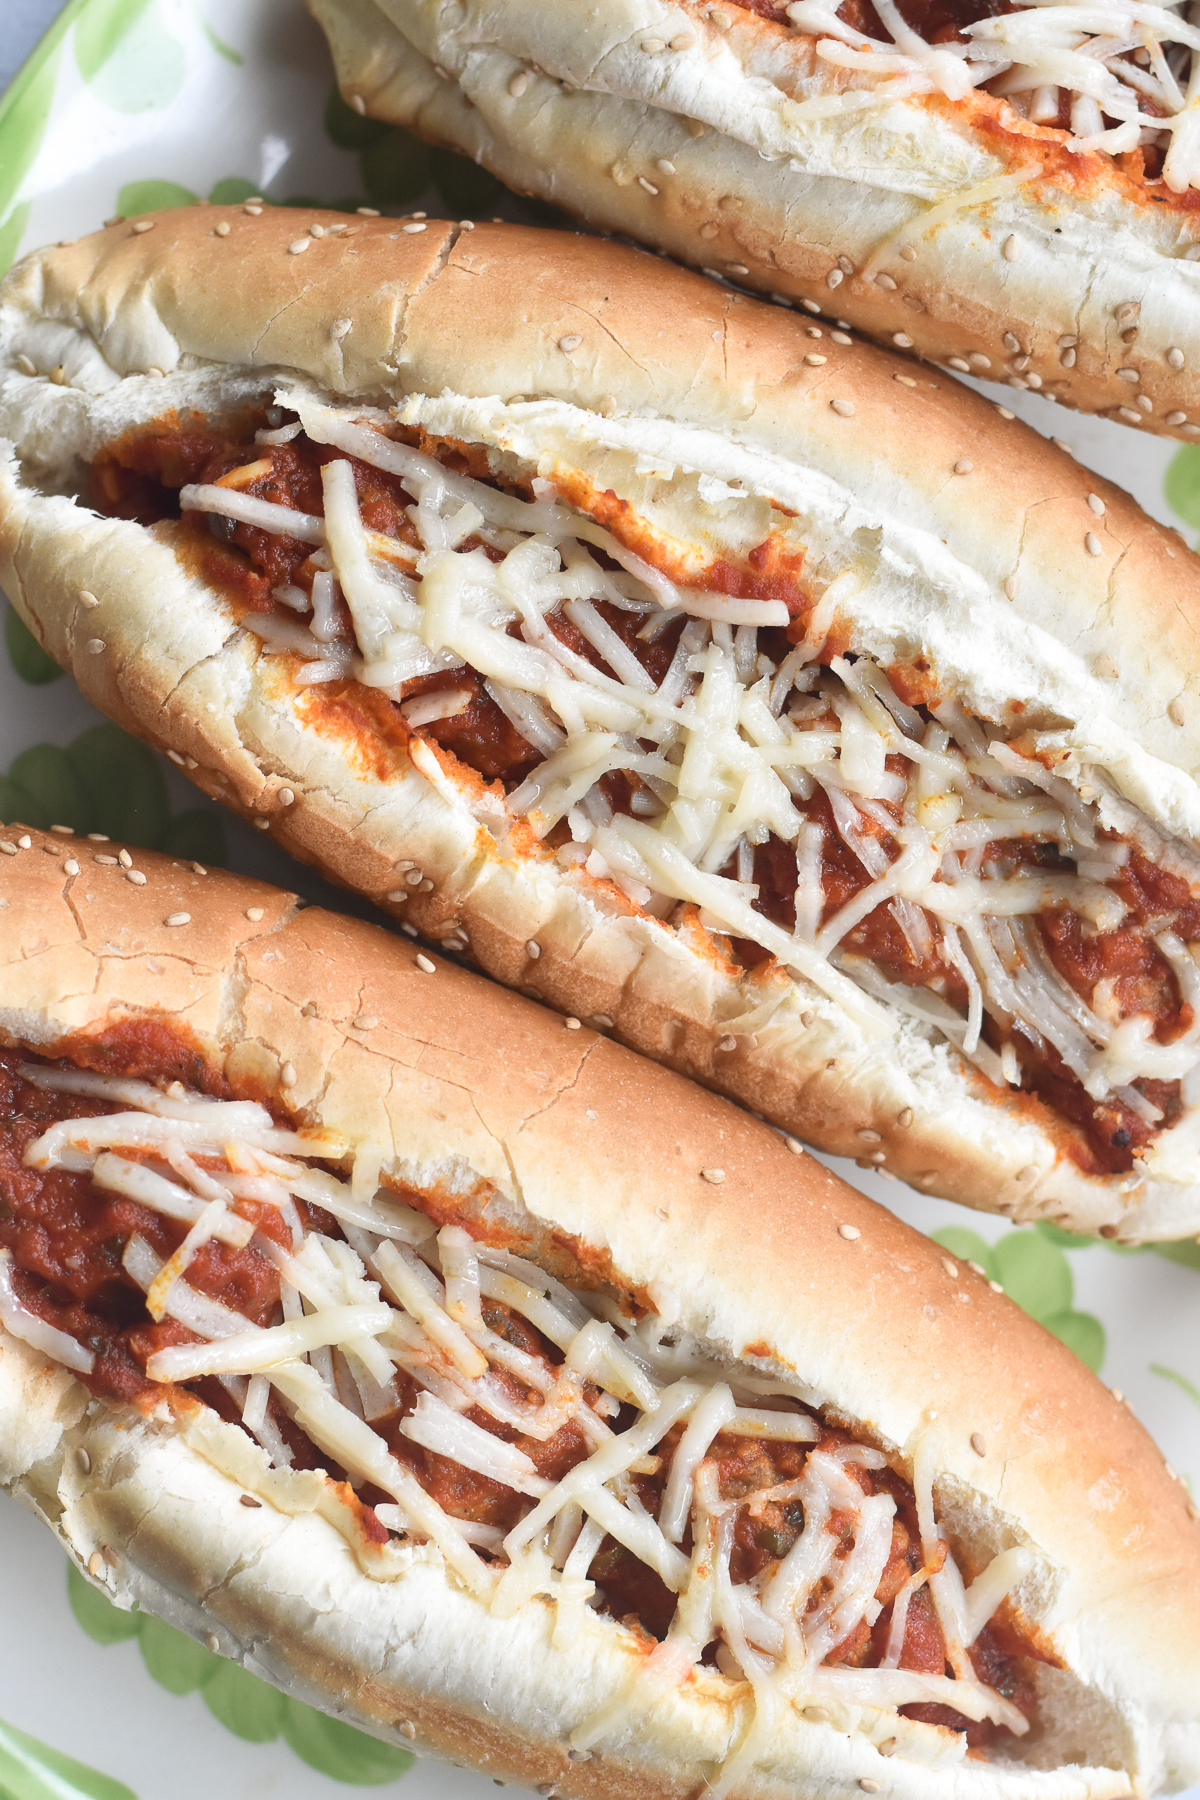 Easy vegan dinner idea! Vegan meatball subs made with store-bought meatballs, an easy tomato sauce and topped with vegan cheese.